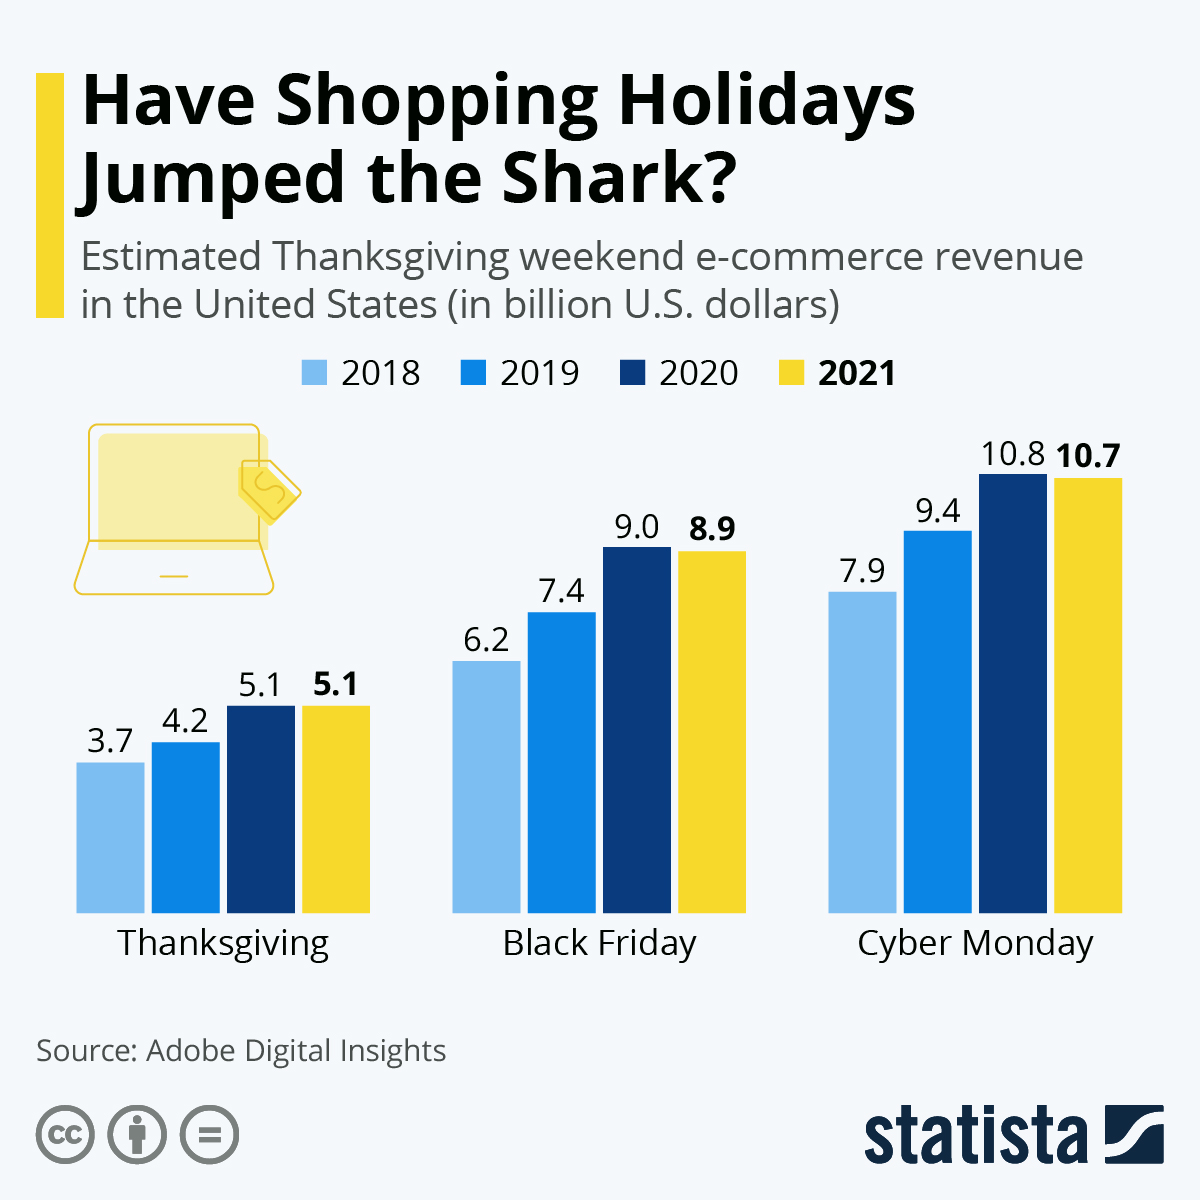 Have Shopping Holidays Jumped the Shark?